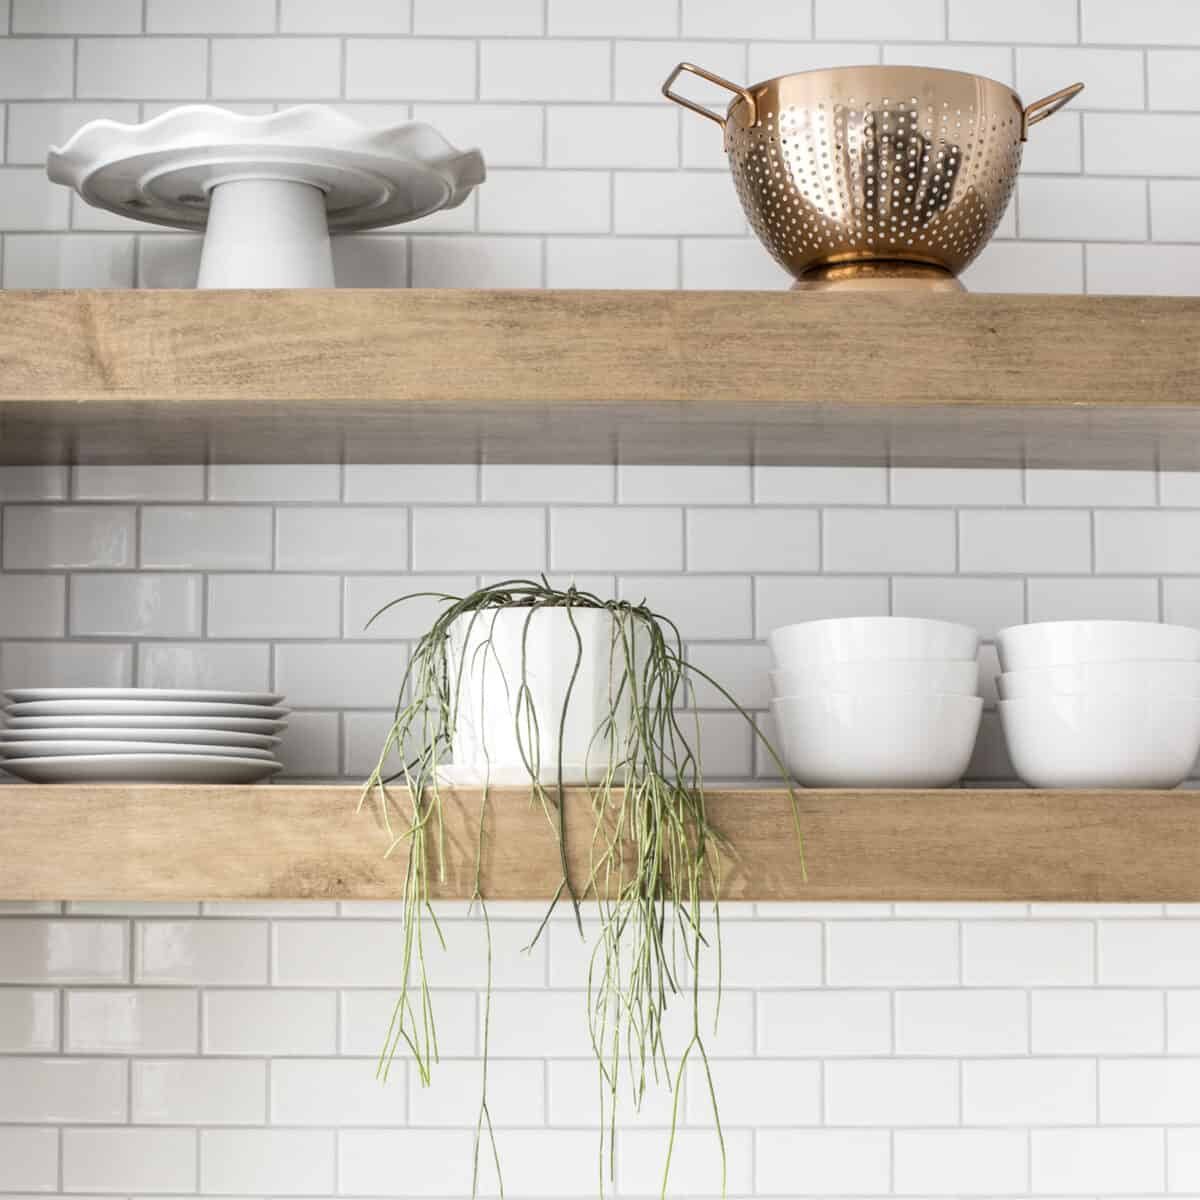 house plant on kitchen shelf with dishes.